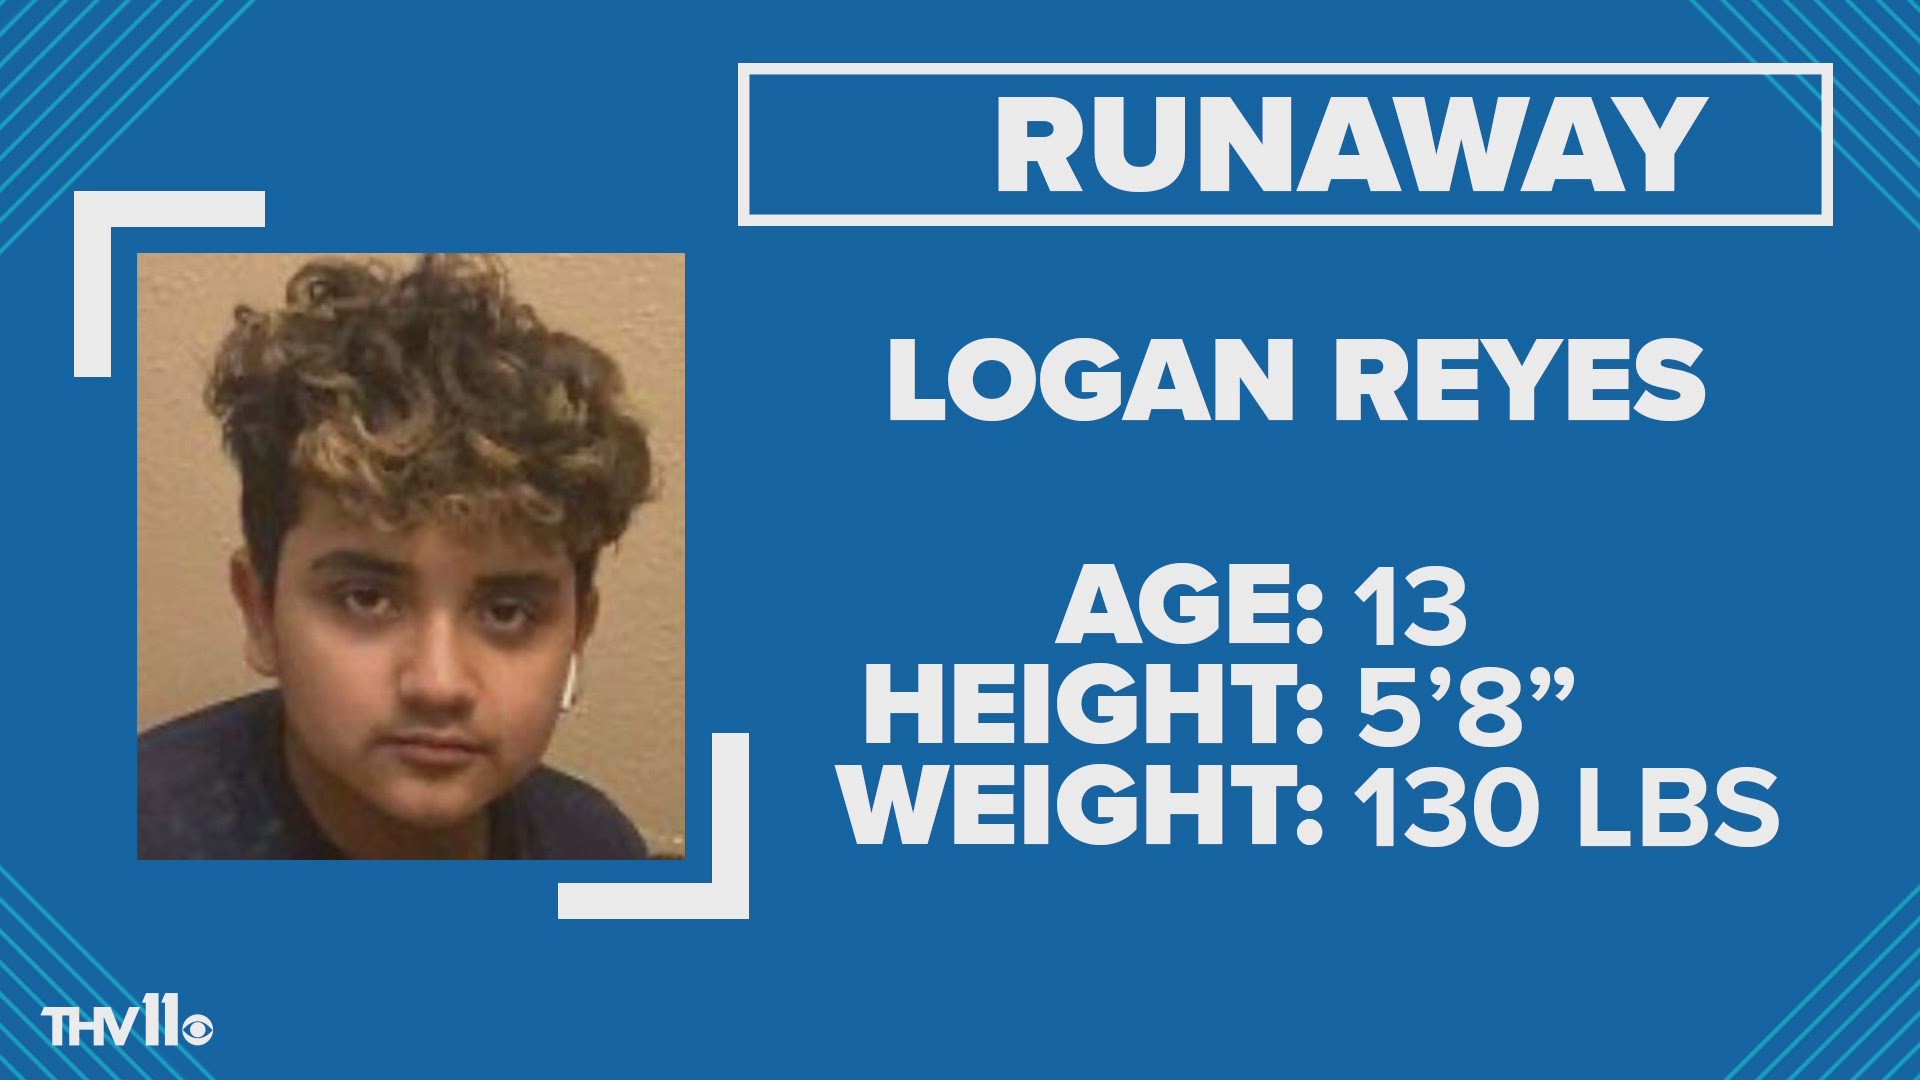 Little Rock police are looking for a 13-year-old runaway named Logan Reyes.